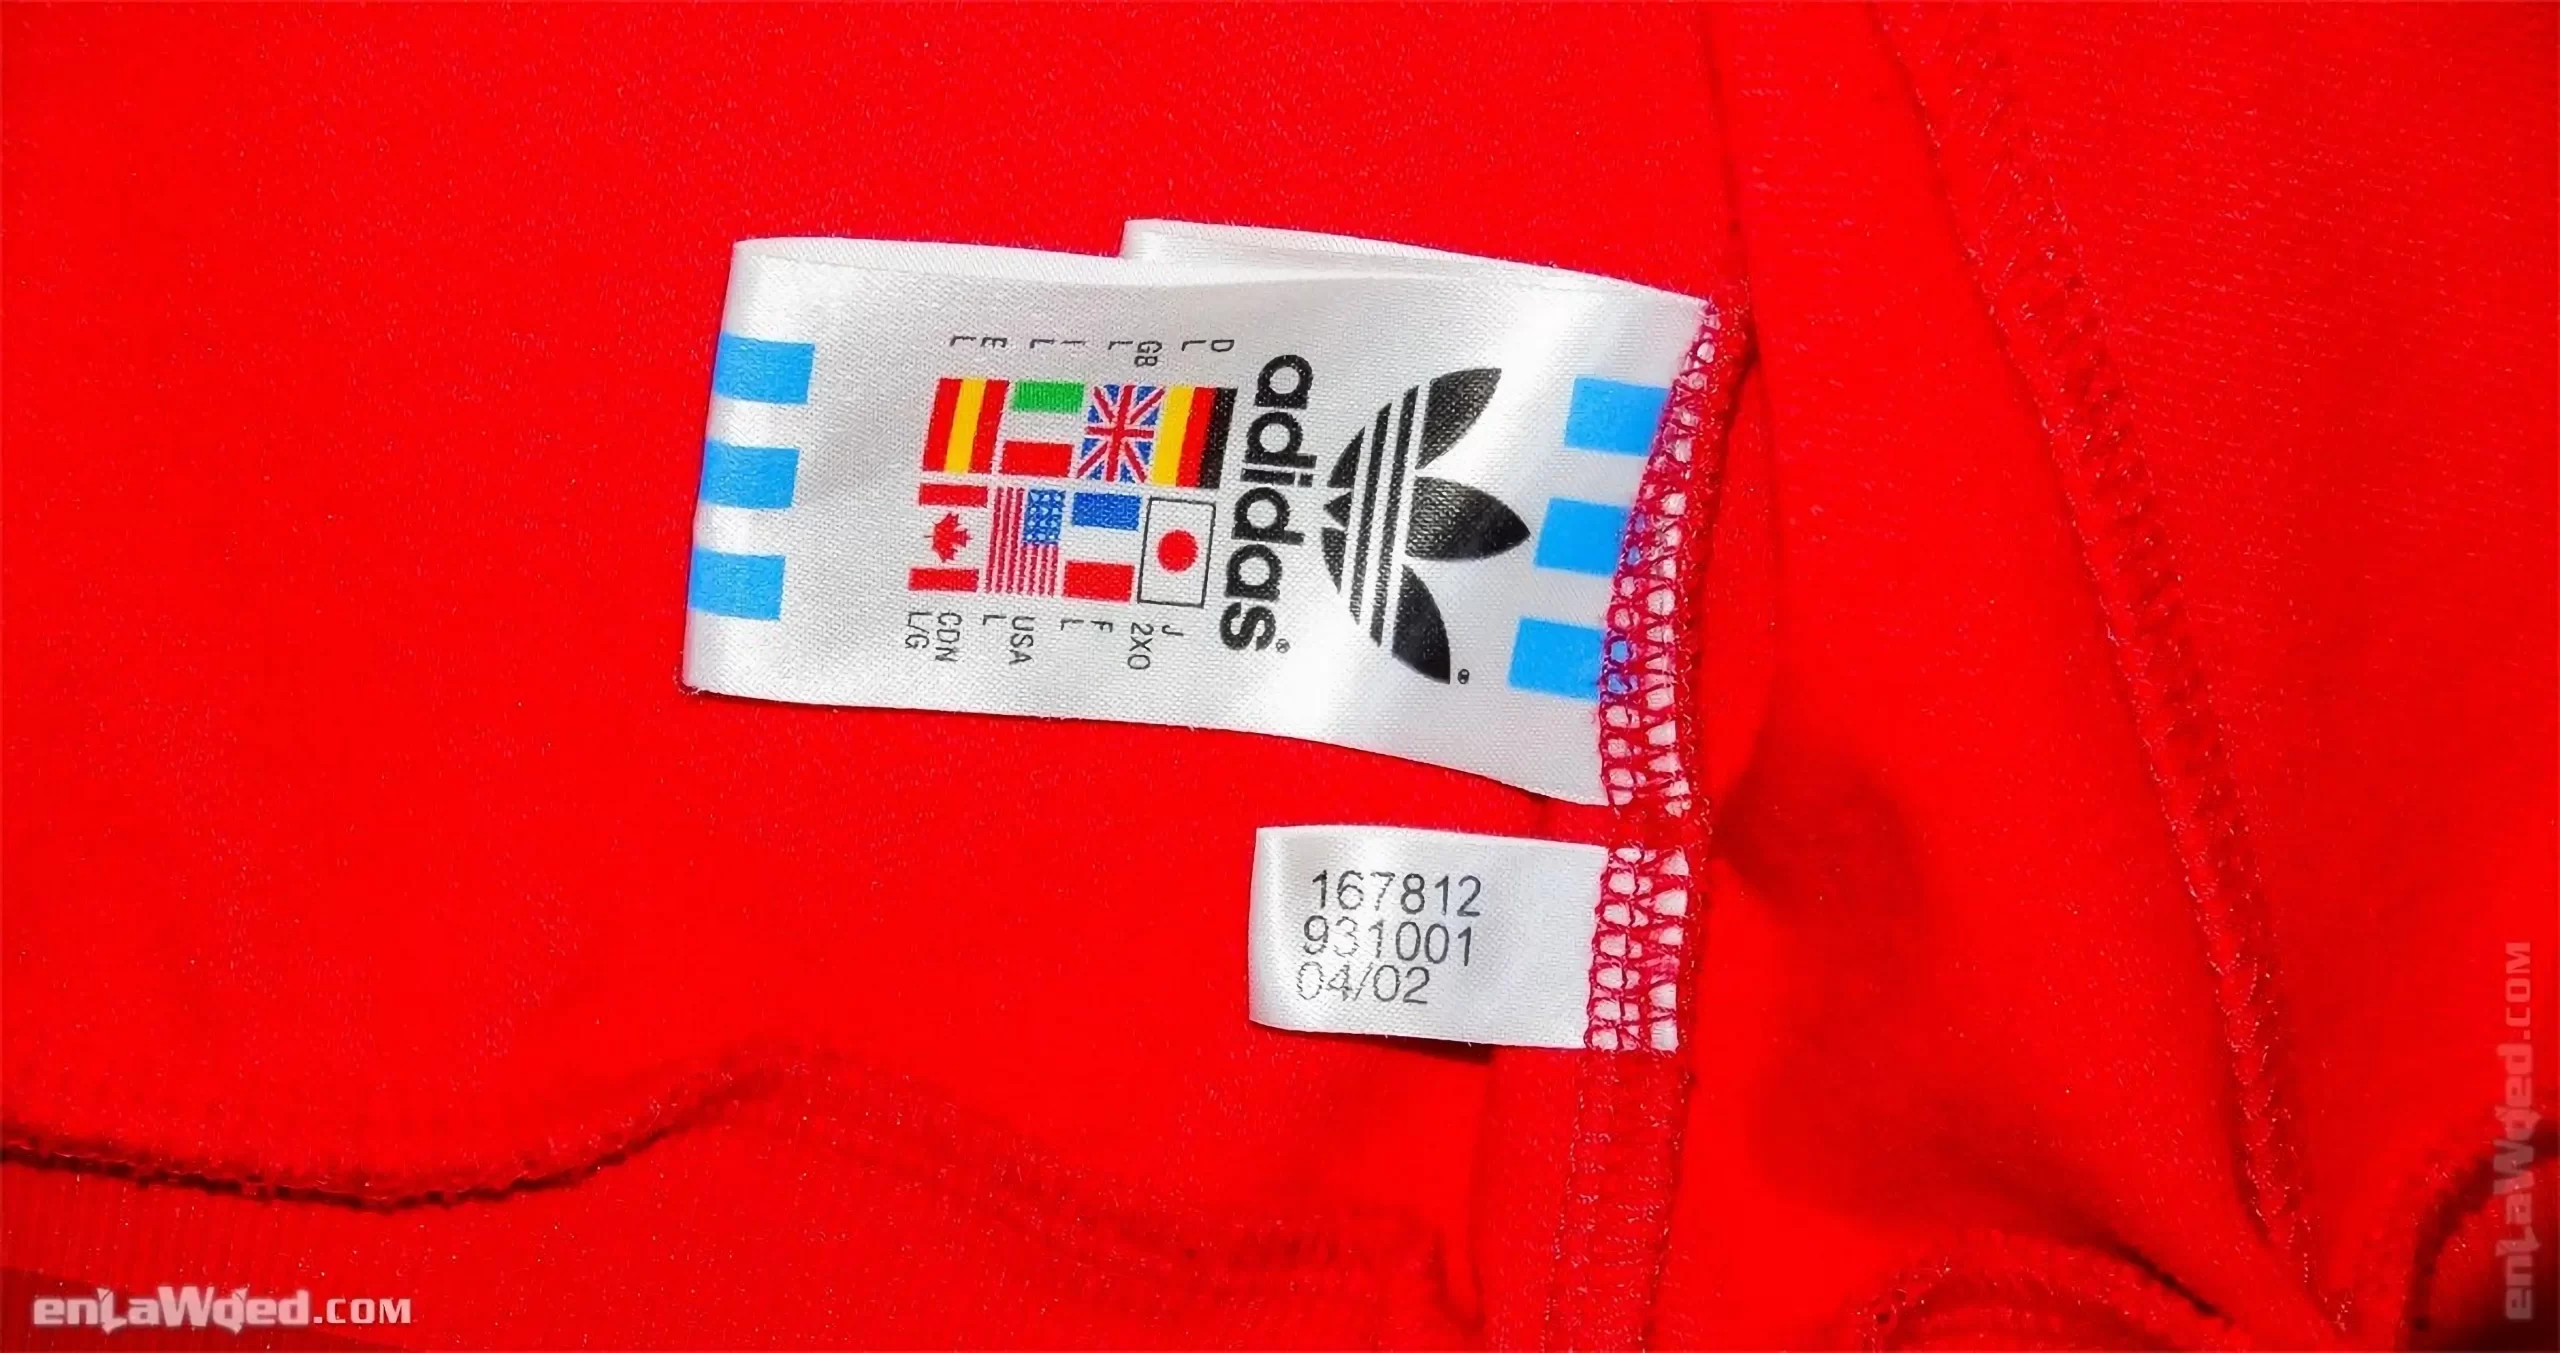 Adidas tag of the CCCP 1982 jacket, with the month and year of fabrication: 04/2002